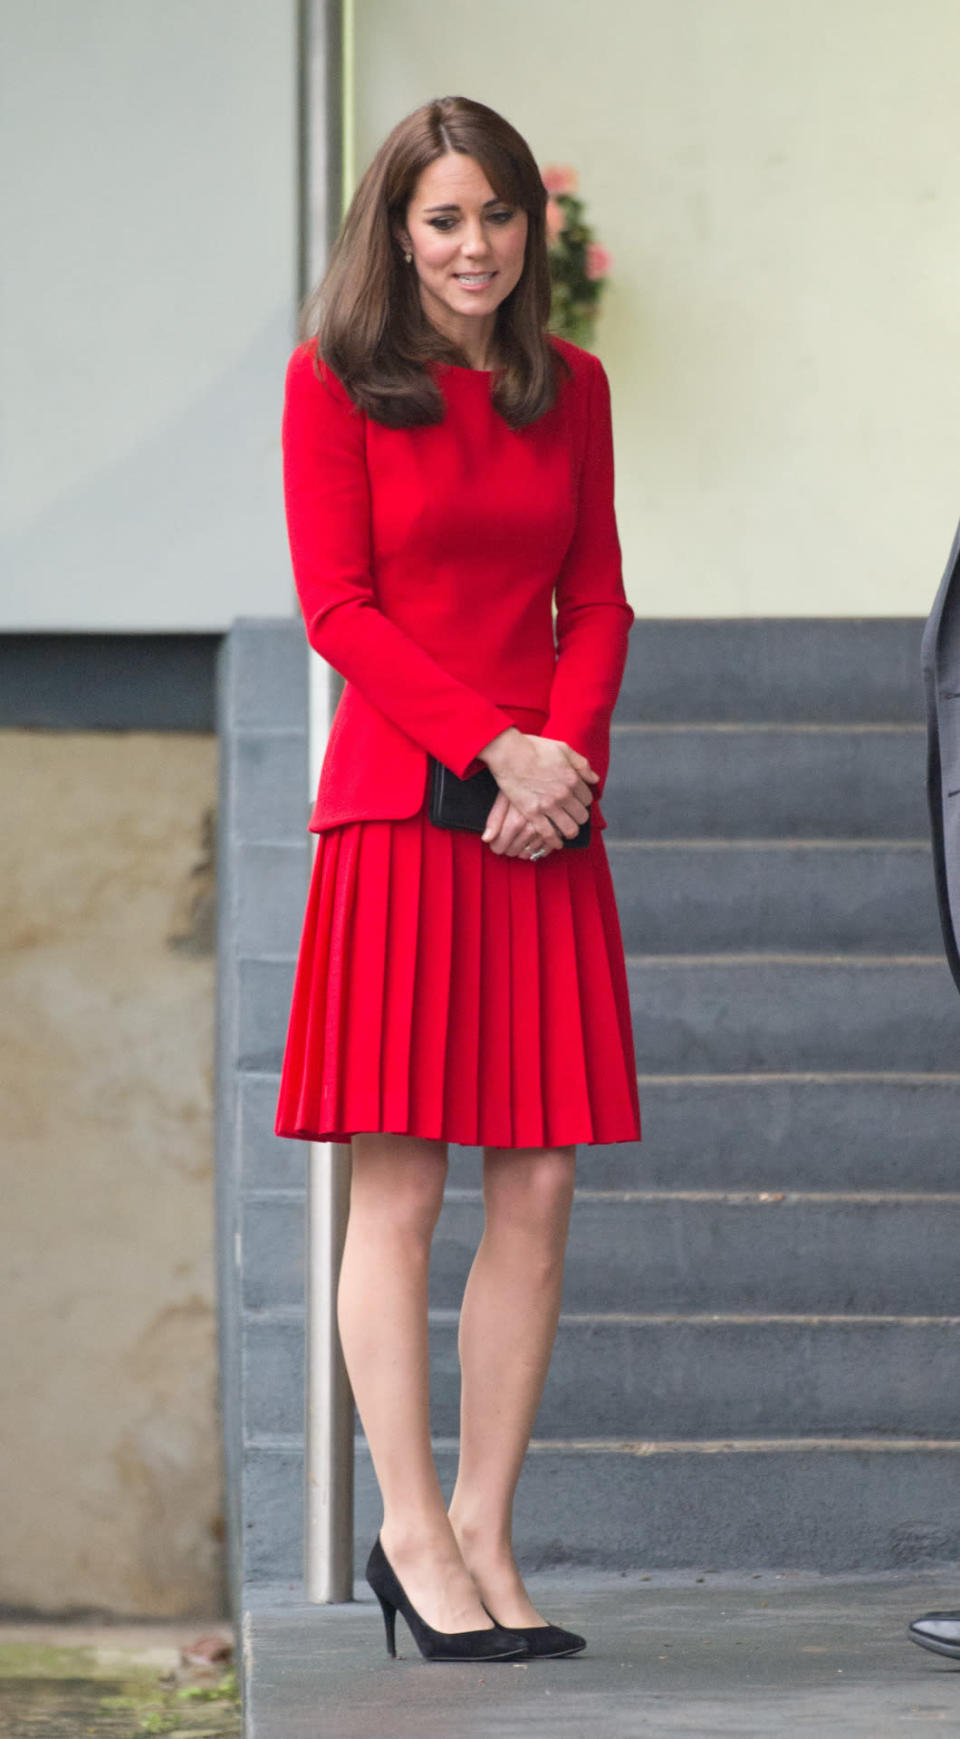 <p>Out for a Christmas lunch, Kate dressed in a vibrant red buttoned Luisa Spagnoli jacket and coordinating skirt with black Stuart Weitzman pumps. </p><p><i>[Photo: PA]</i></p>